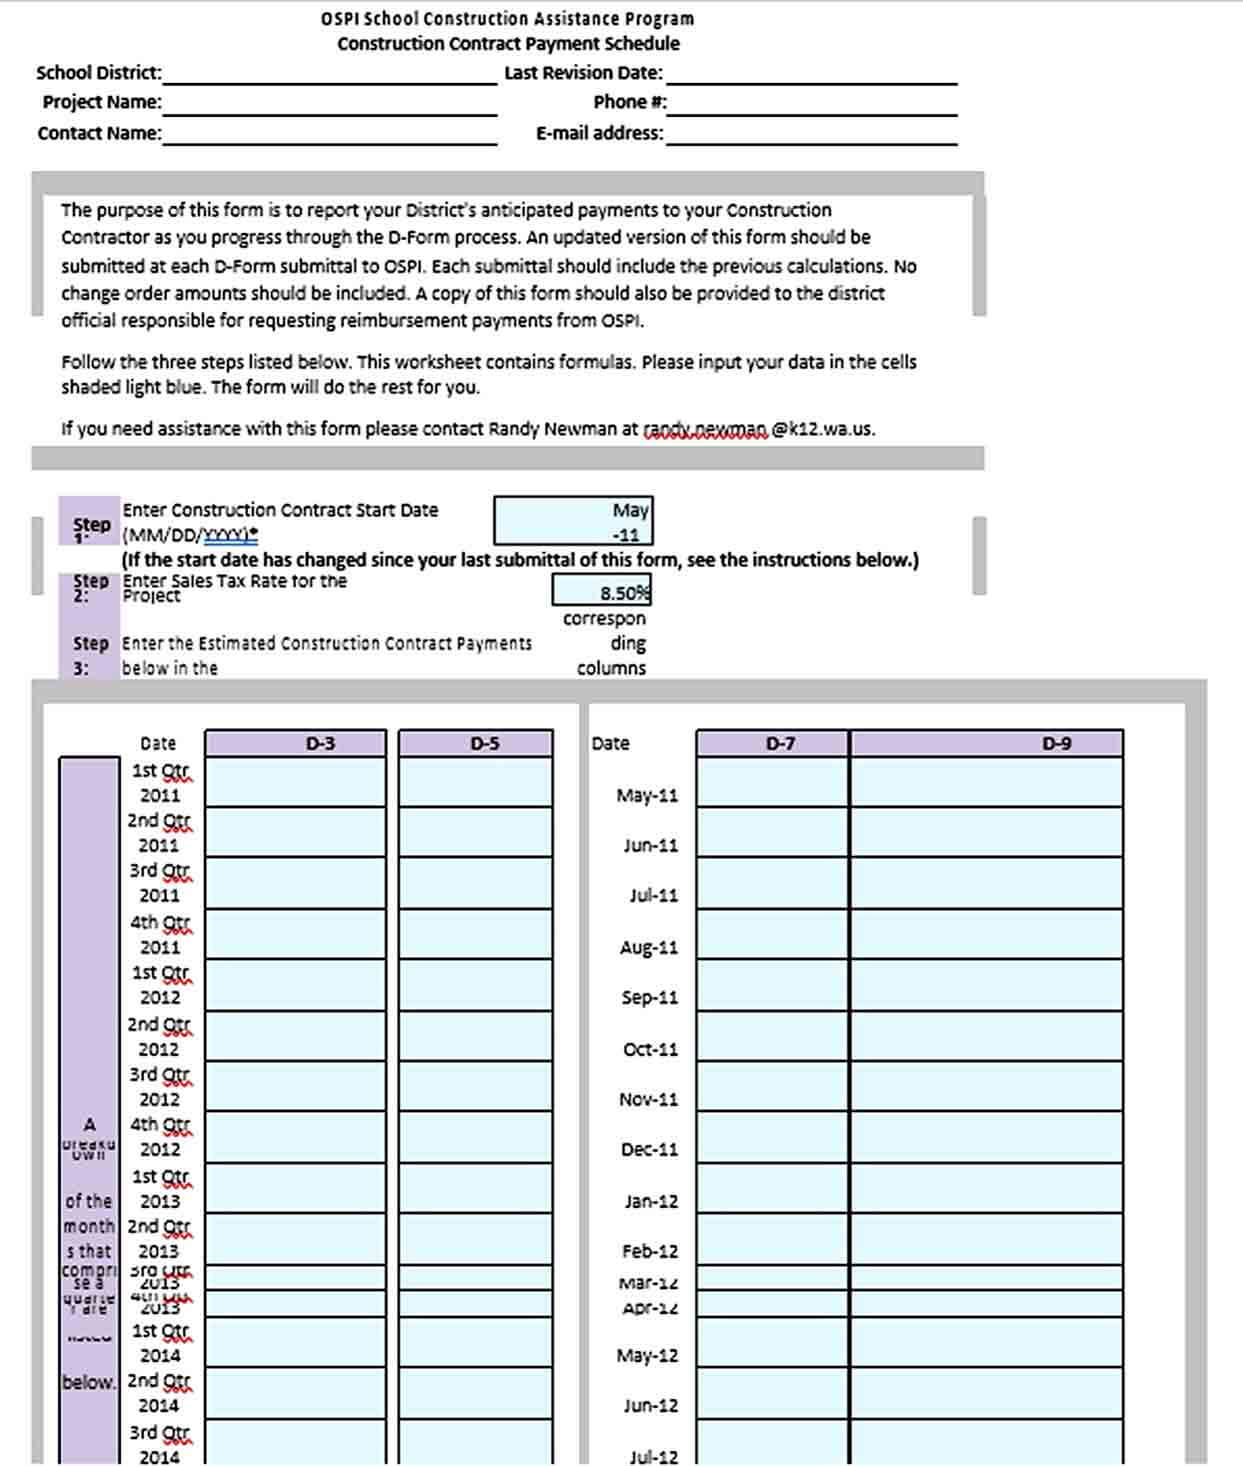 Construction Contract Payment Schedule Template